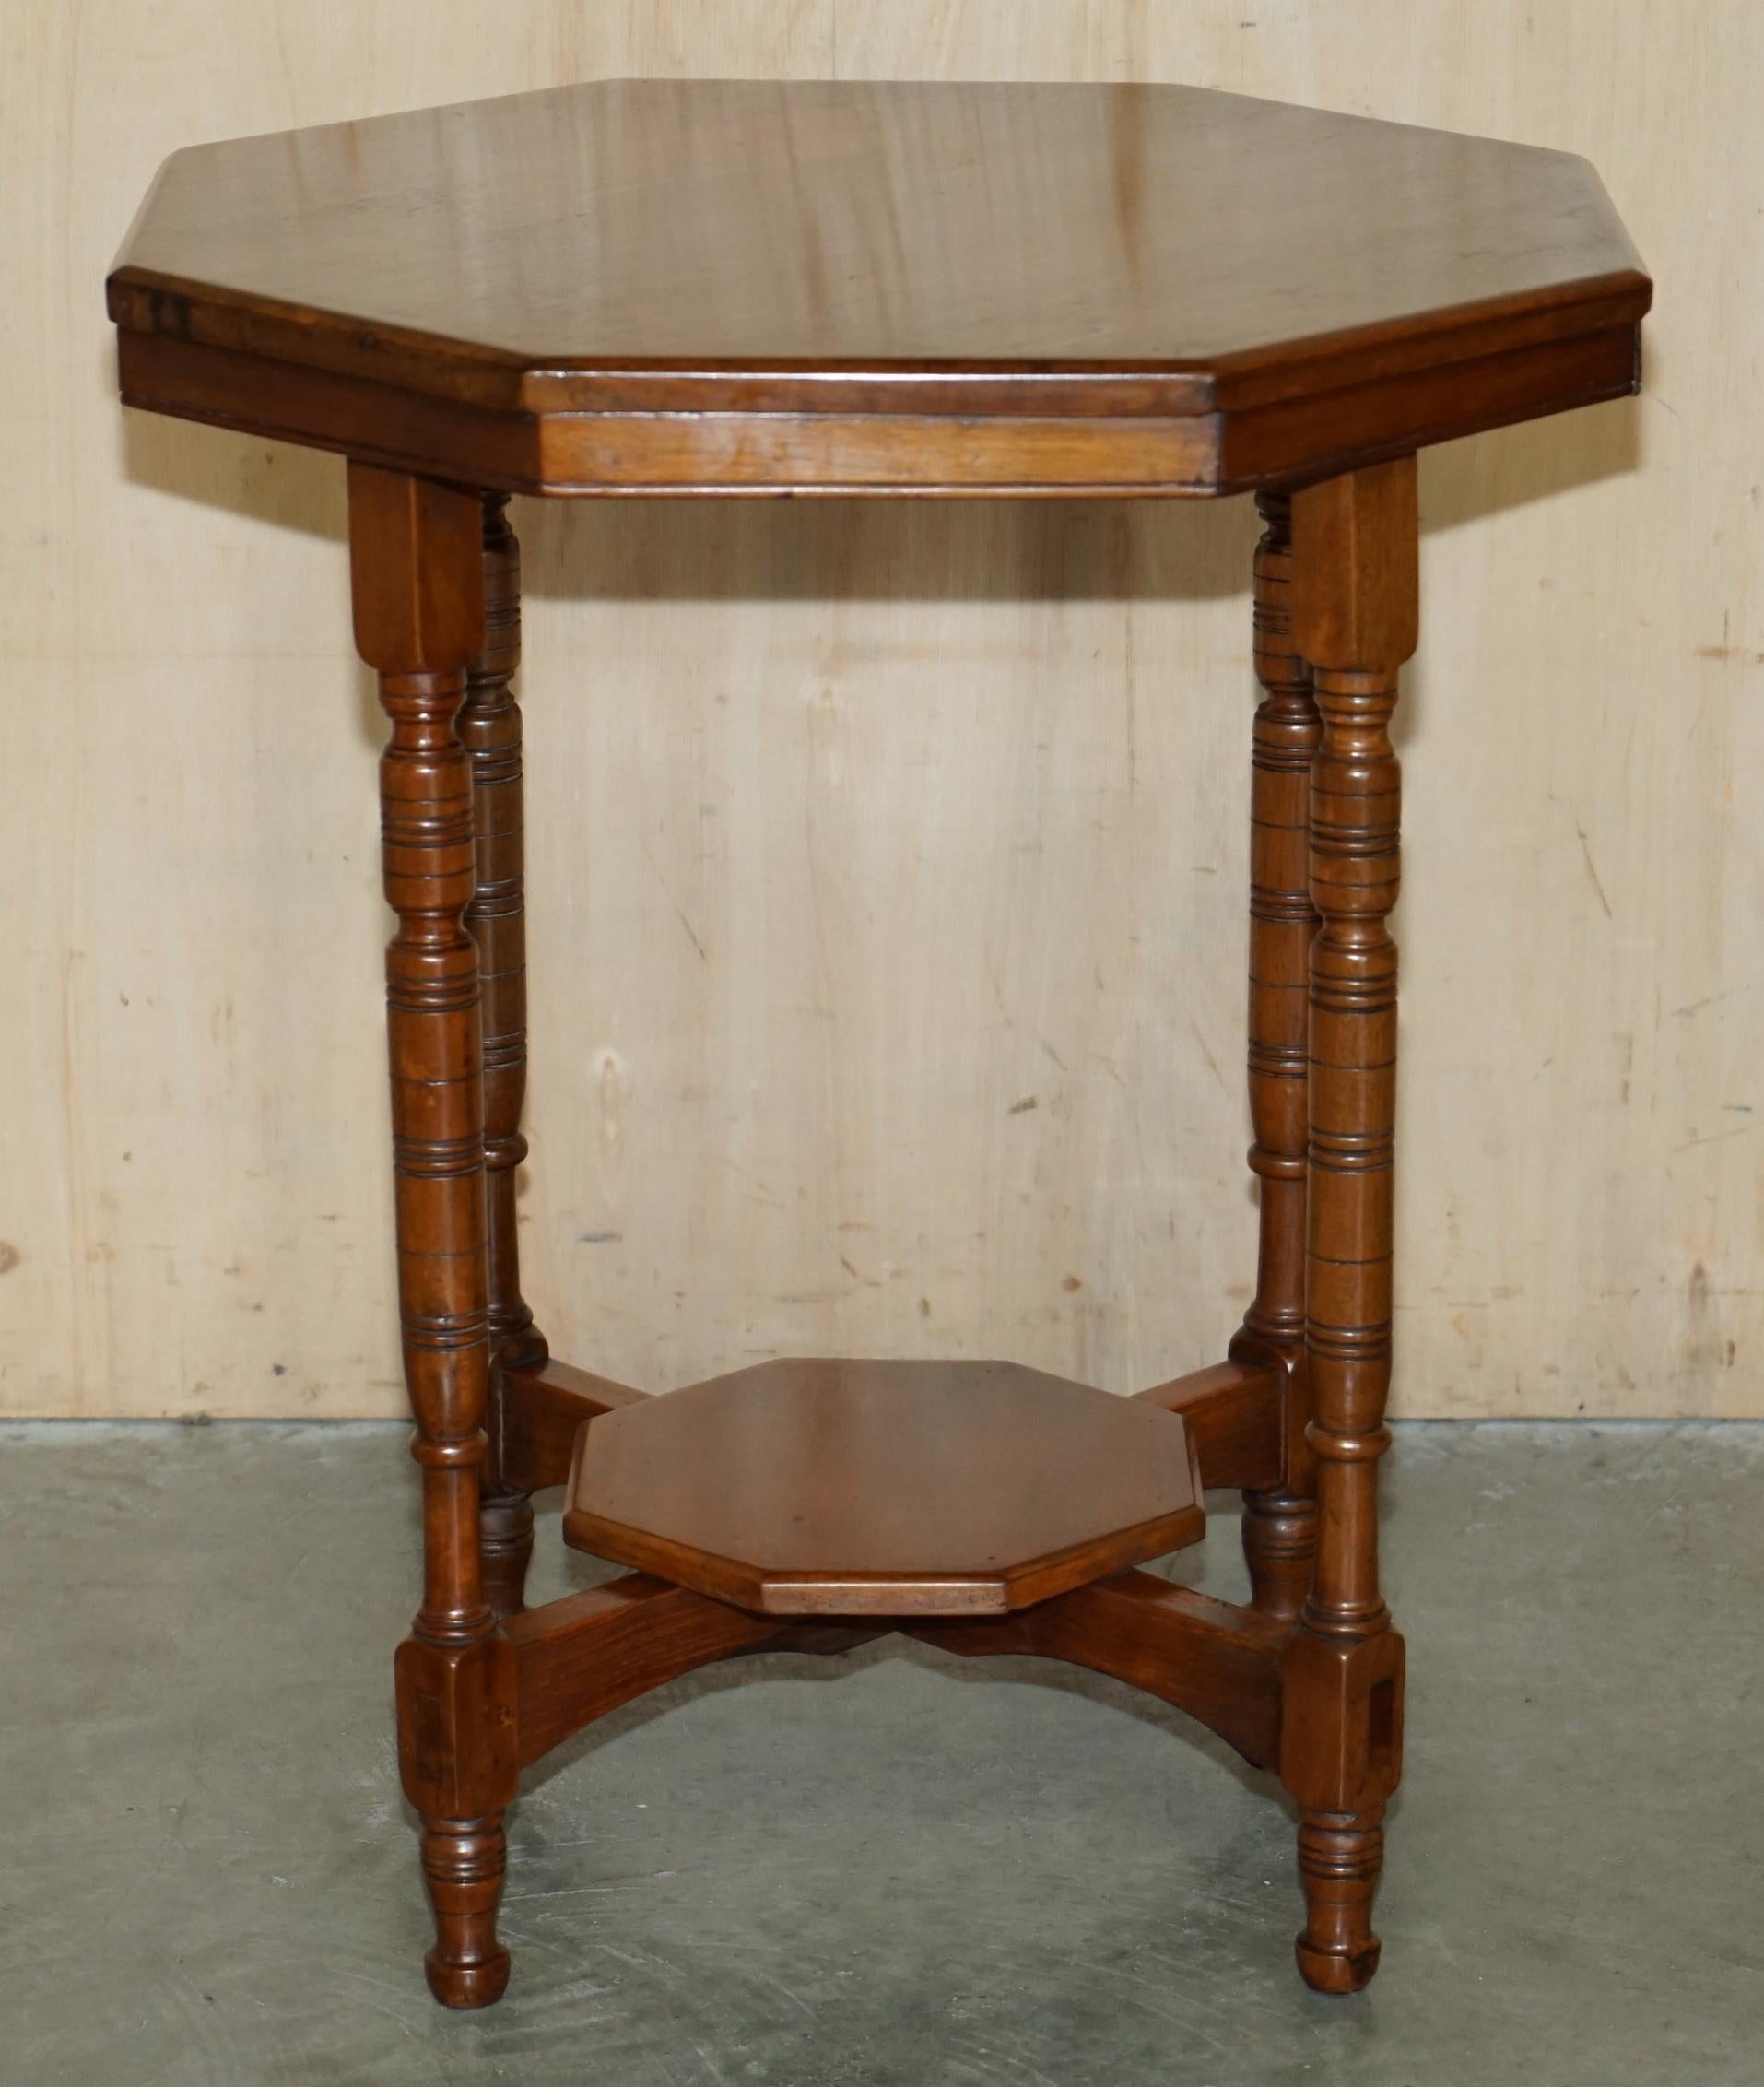 DECORATIVE ENGLISH ViCTORIAN HAND CARVED OCTAGONAL SIDE END OCCASIONAL TABLE For Sale 9